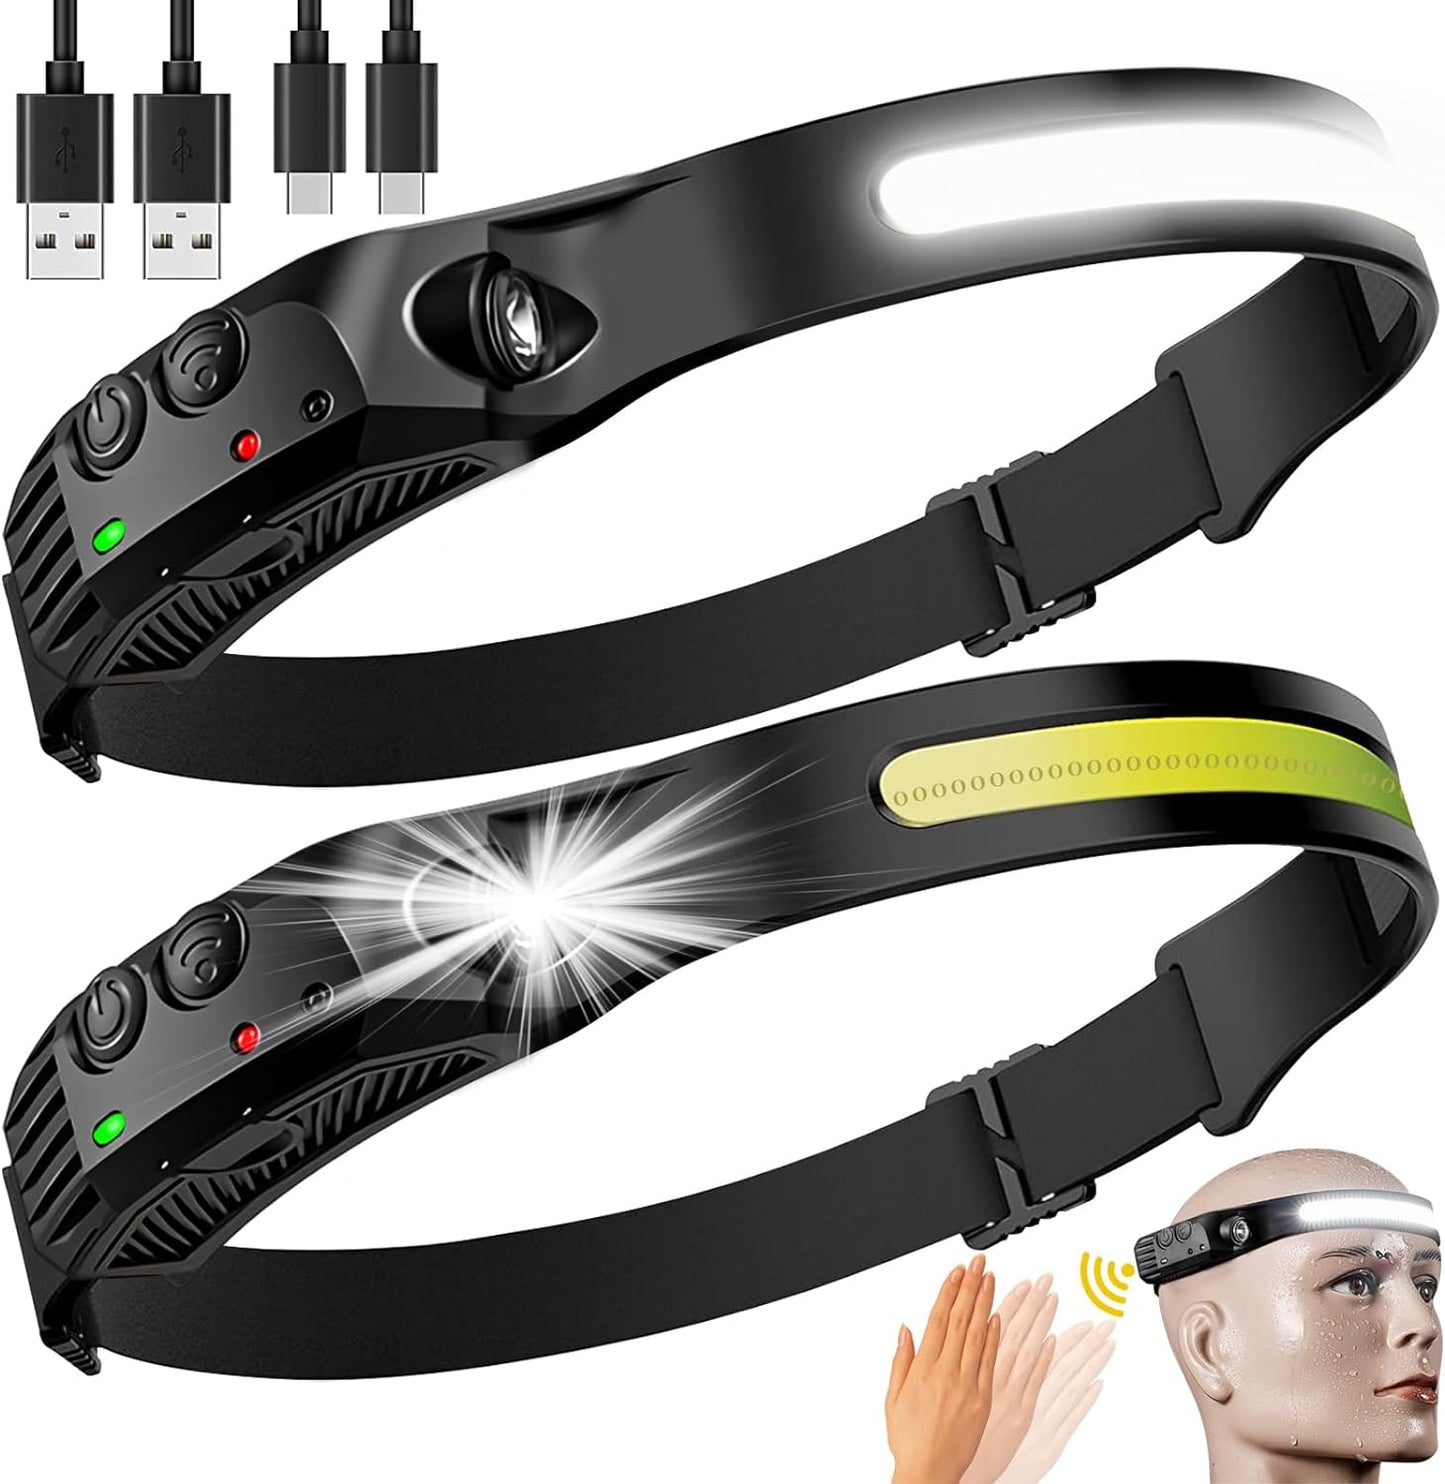 Rechargeable LED Headlamp 2 Packs,Cob230° Wide Beam Headlamps, 5 Modes of Lightweight Headlamps with Motion Sensors, Type-C USB Charging Headlamps,Suitable for Night Running,Fishing, Cycling, Camping